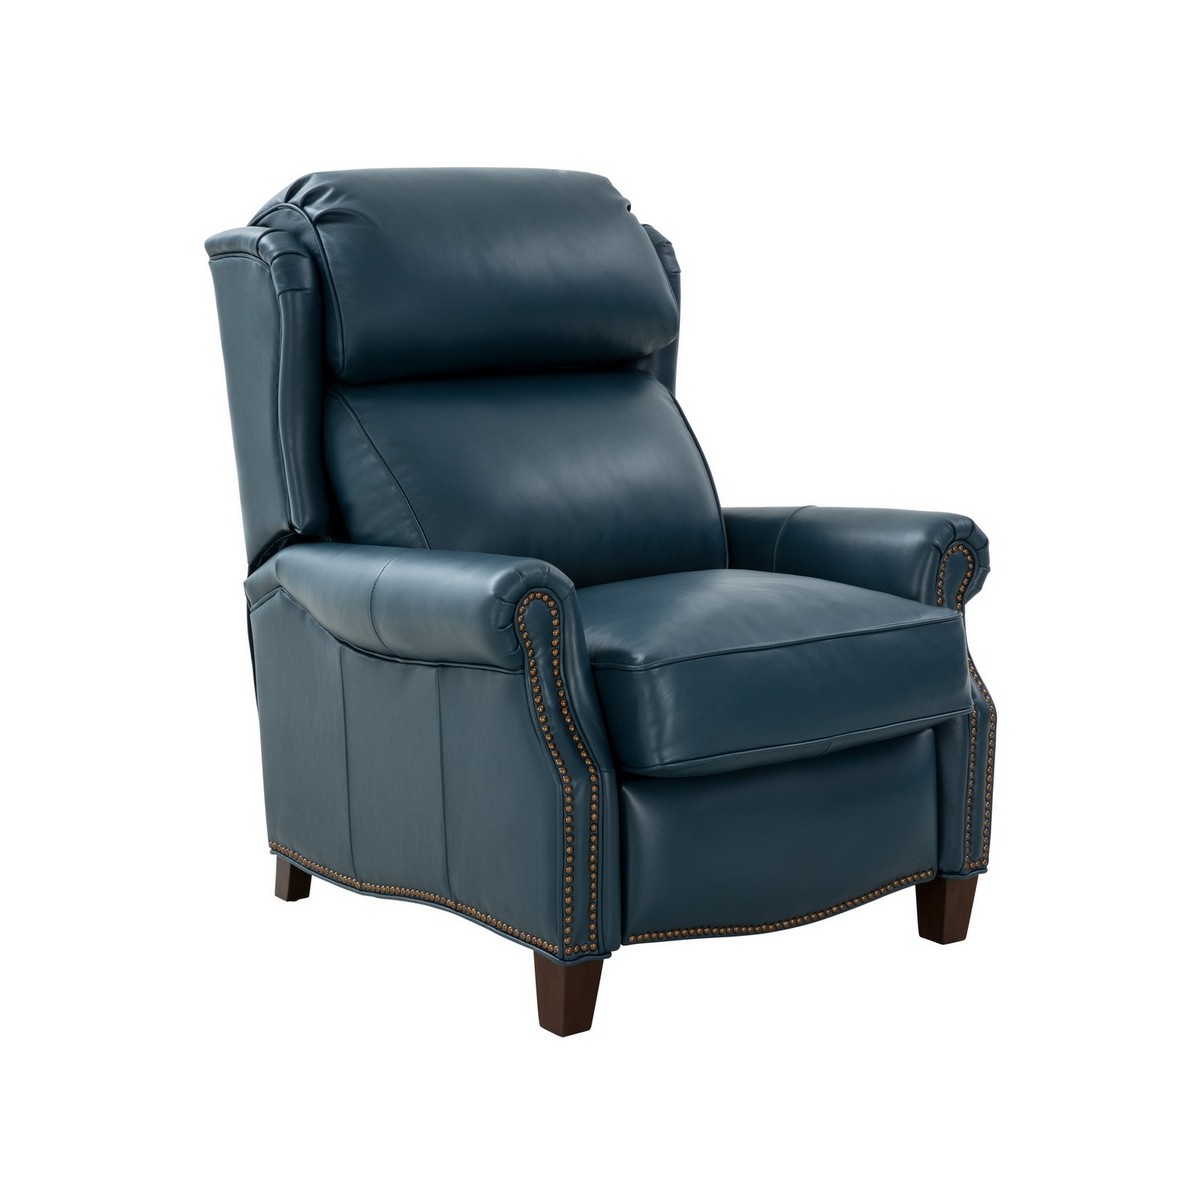 Barcalounger Meade Recliner Chair - Prestin Yale Blue/All Leather